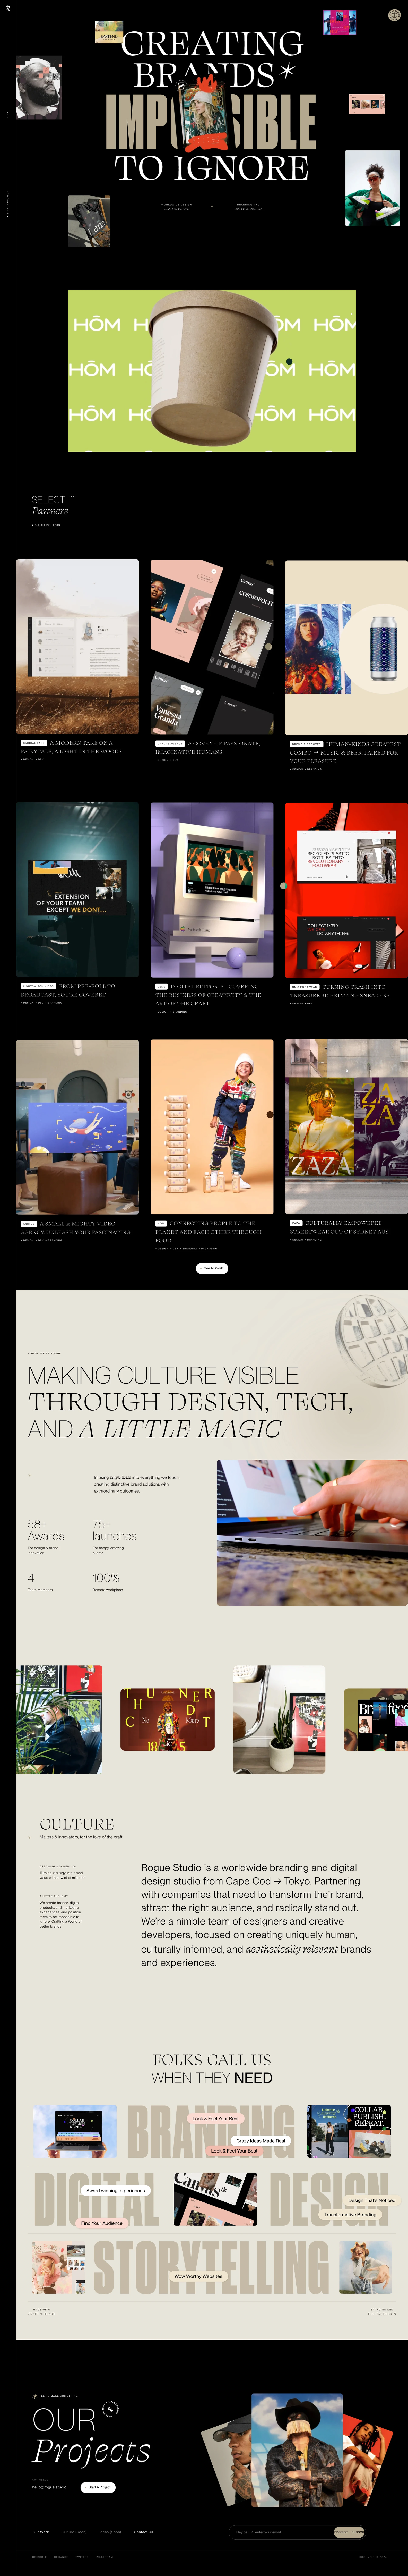 Rogue Studio Landing Page Example: We are a multidisciplinary creative company creating brands, digital experiences, and marketing campaigns that are impossible to ignore.